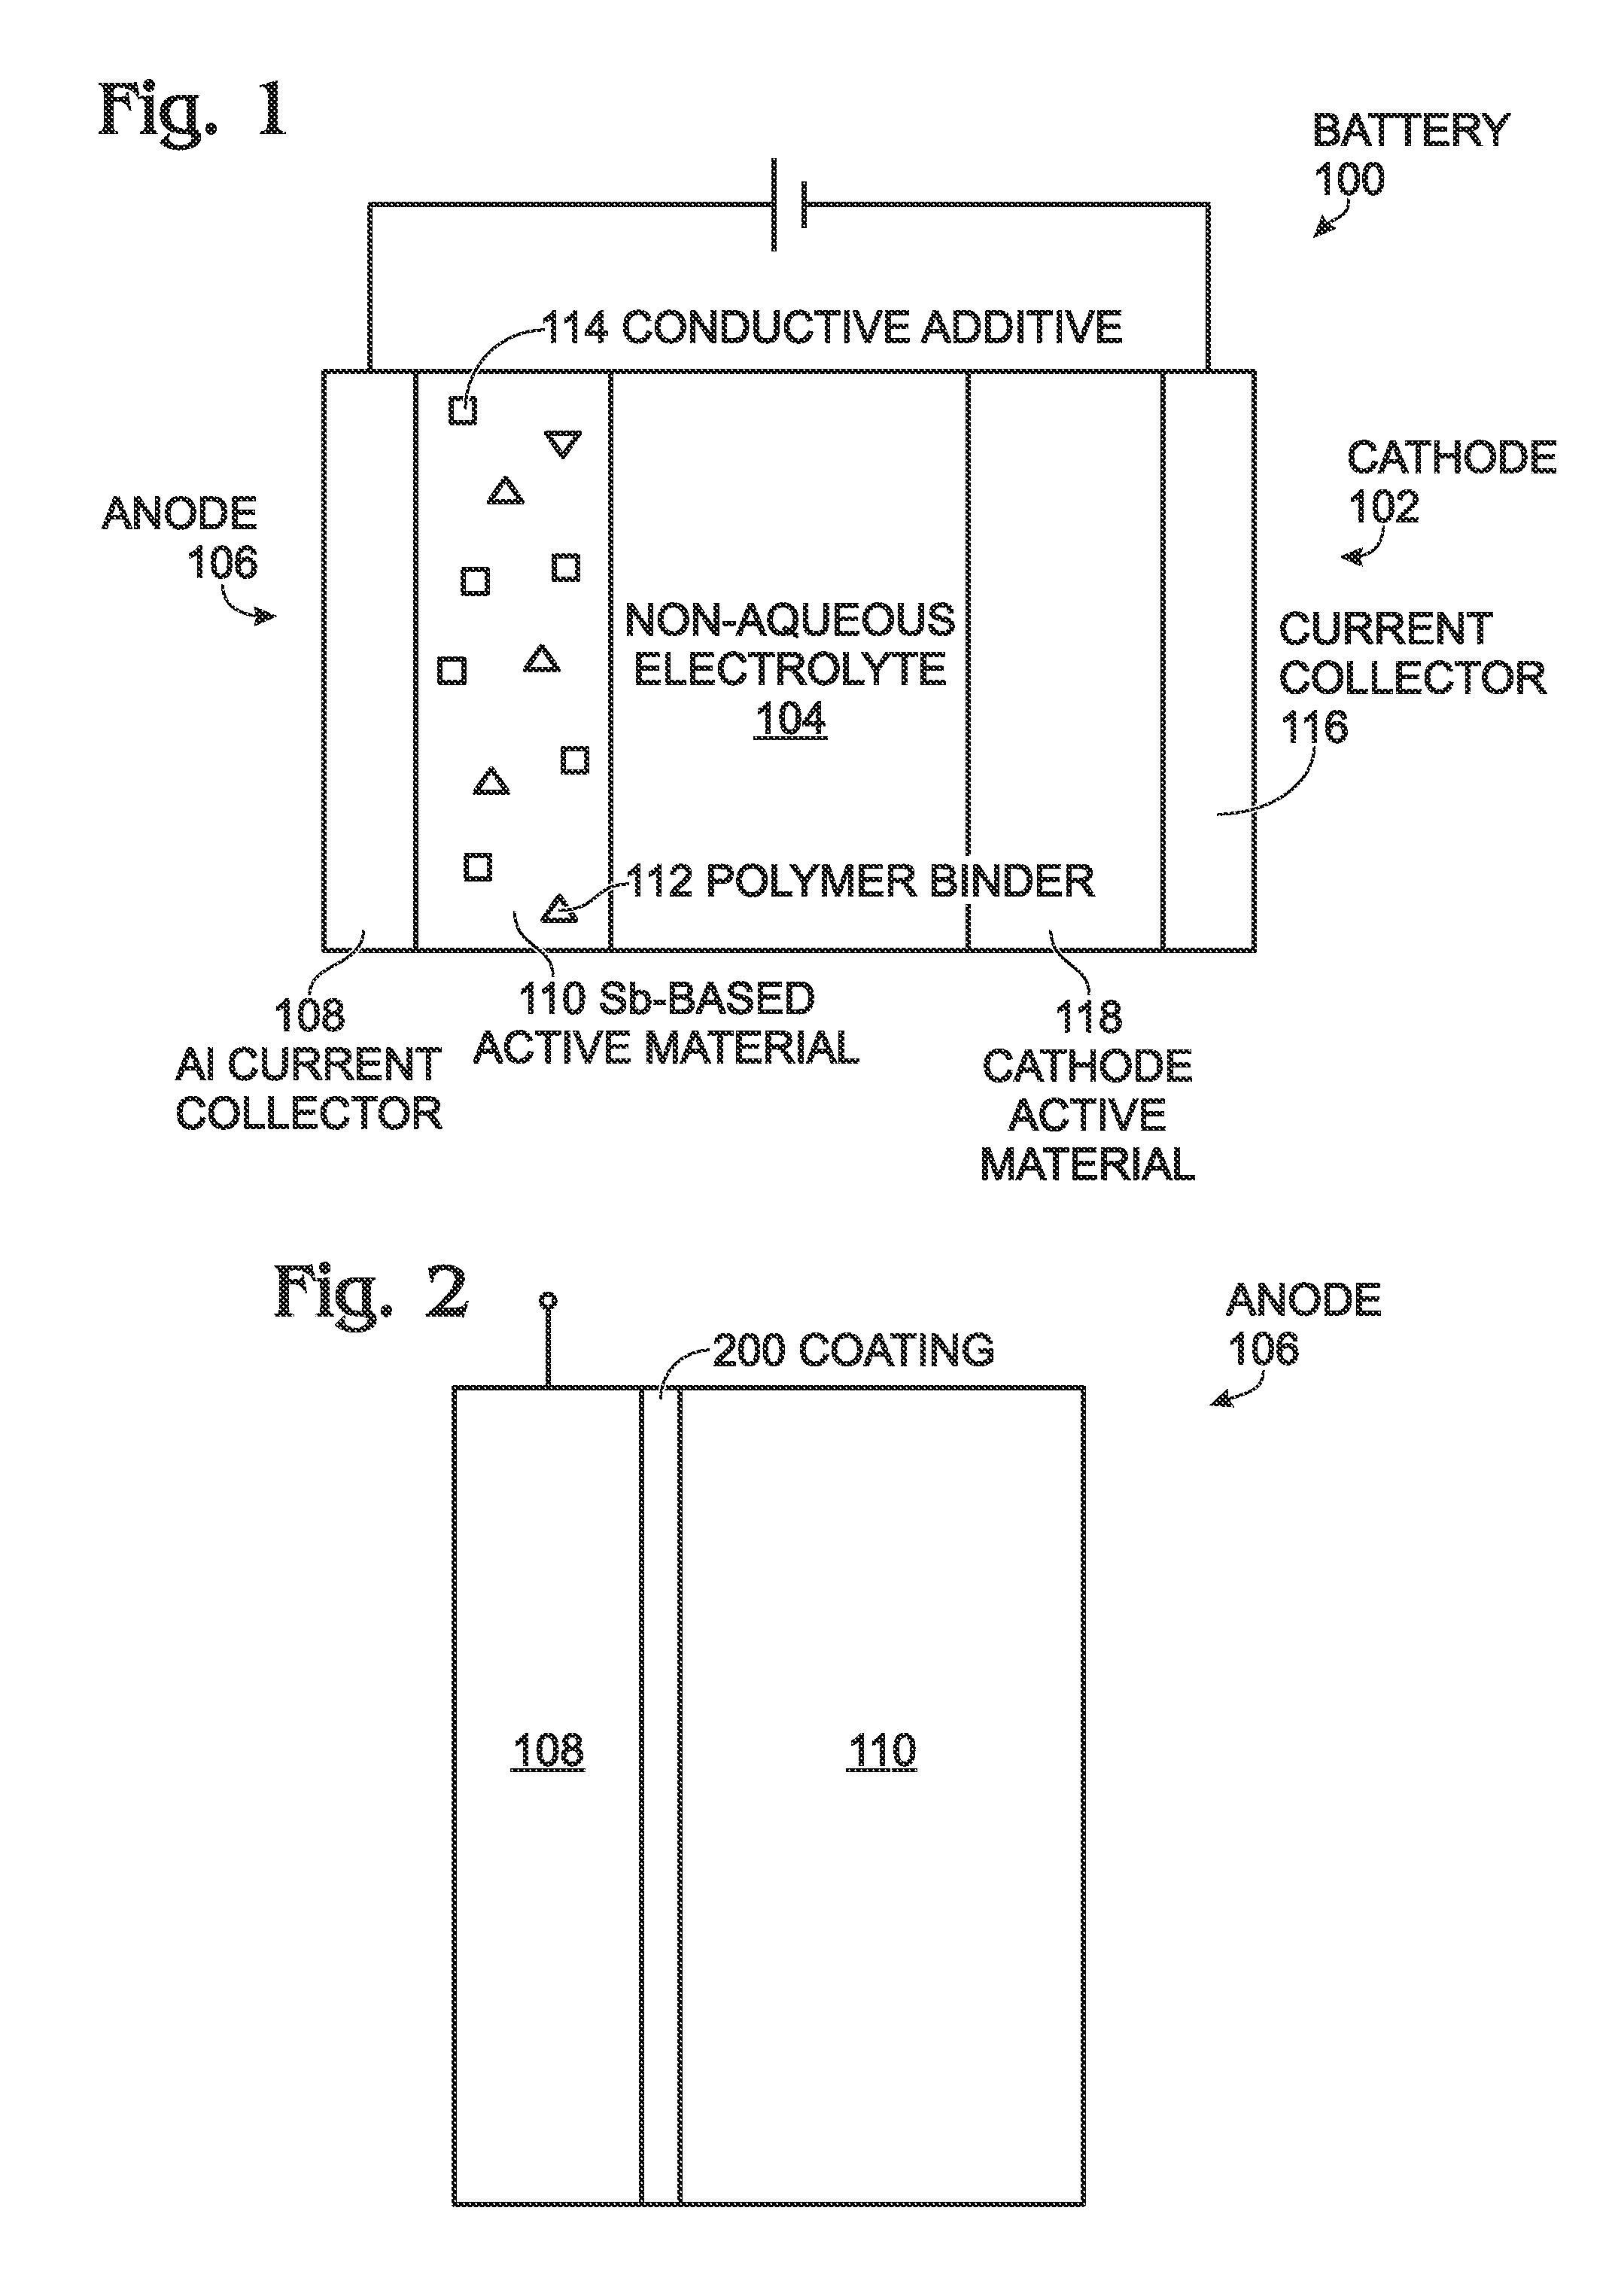 Antimony-Based Anode on Aluminum Current Collector